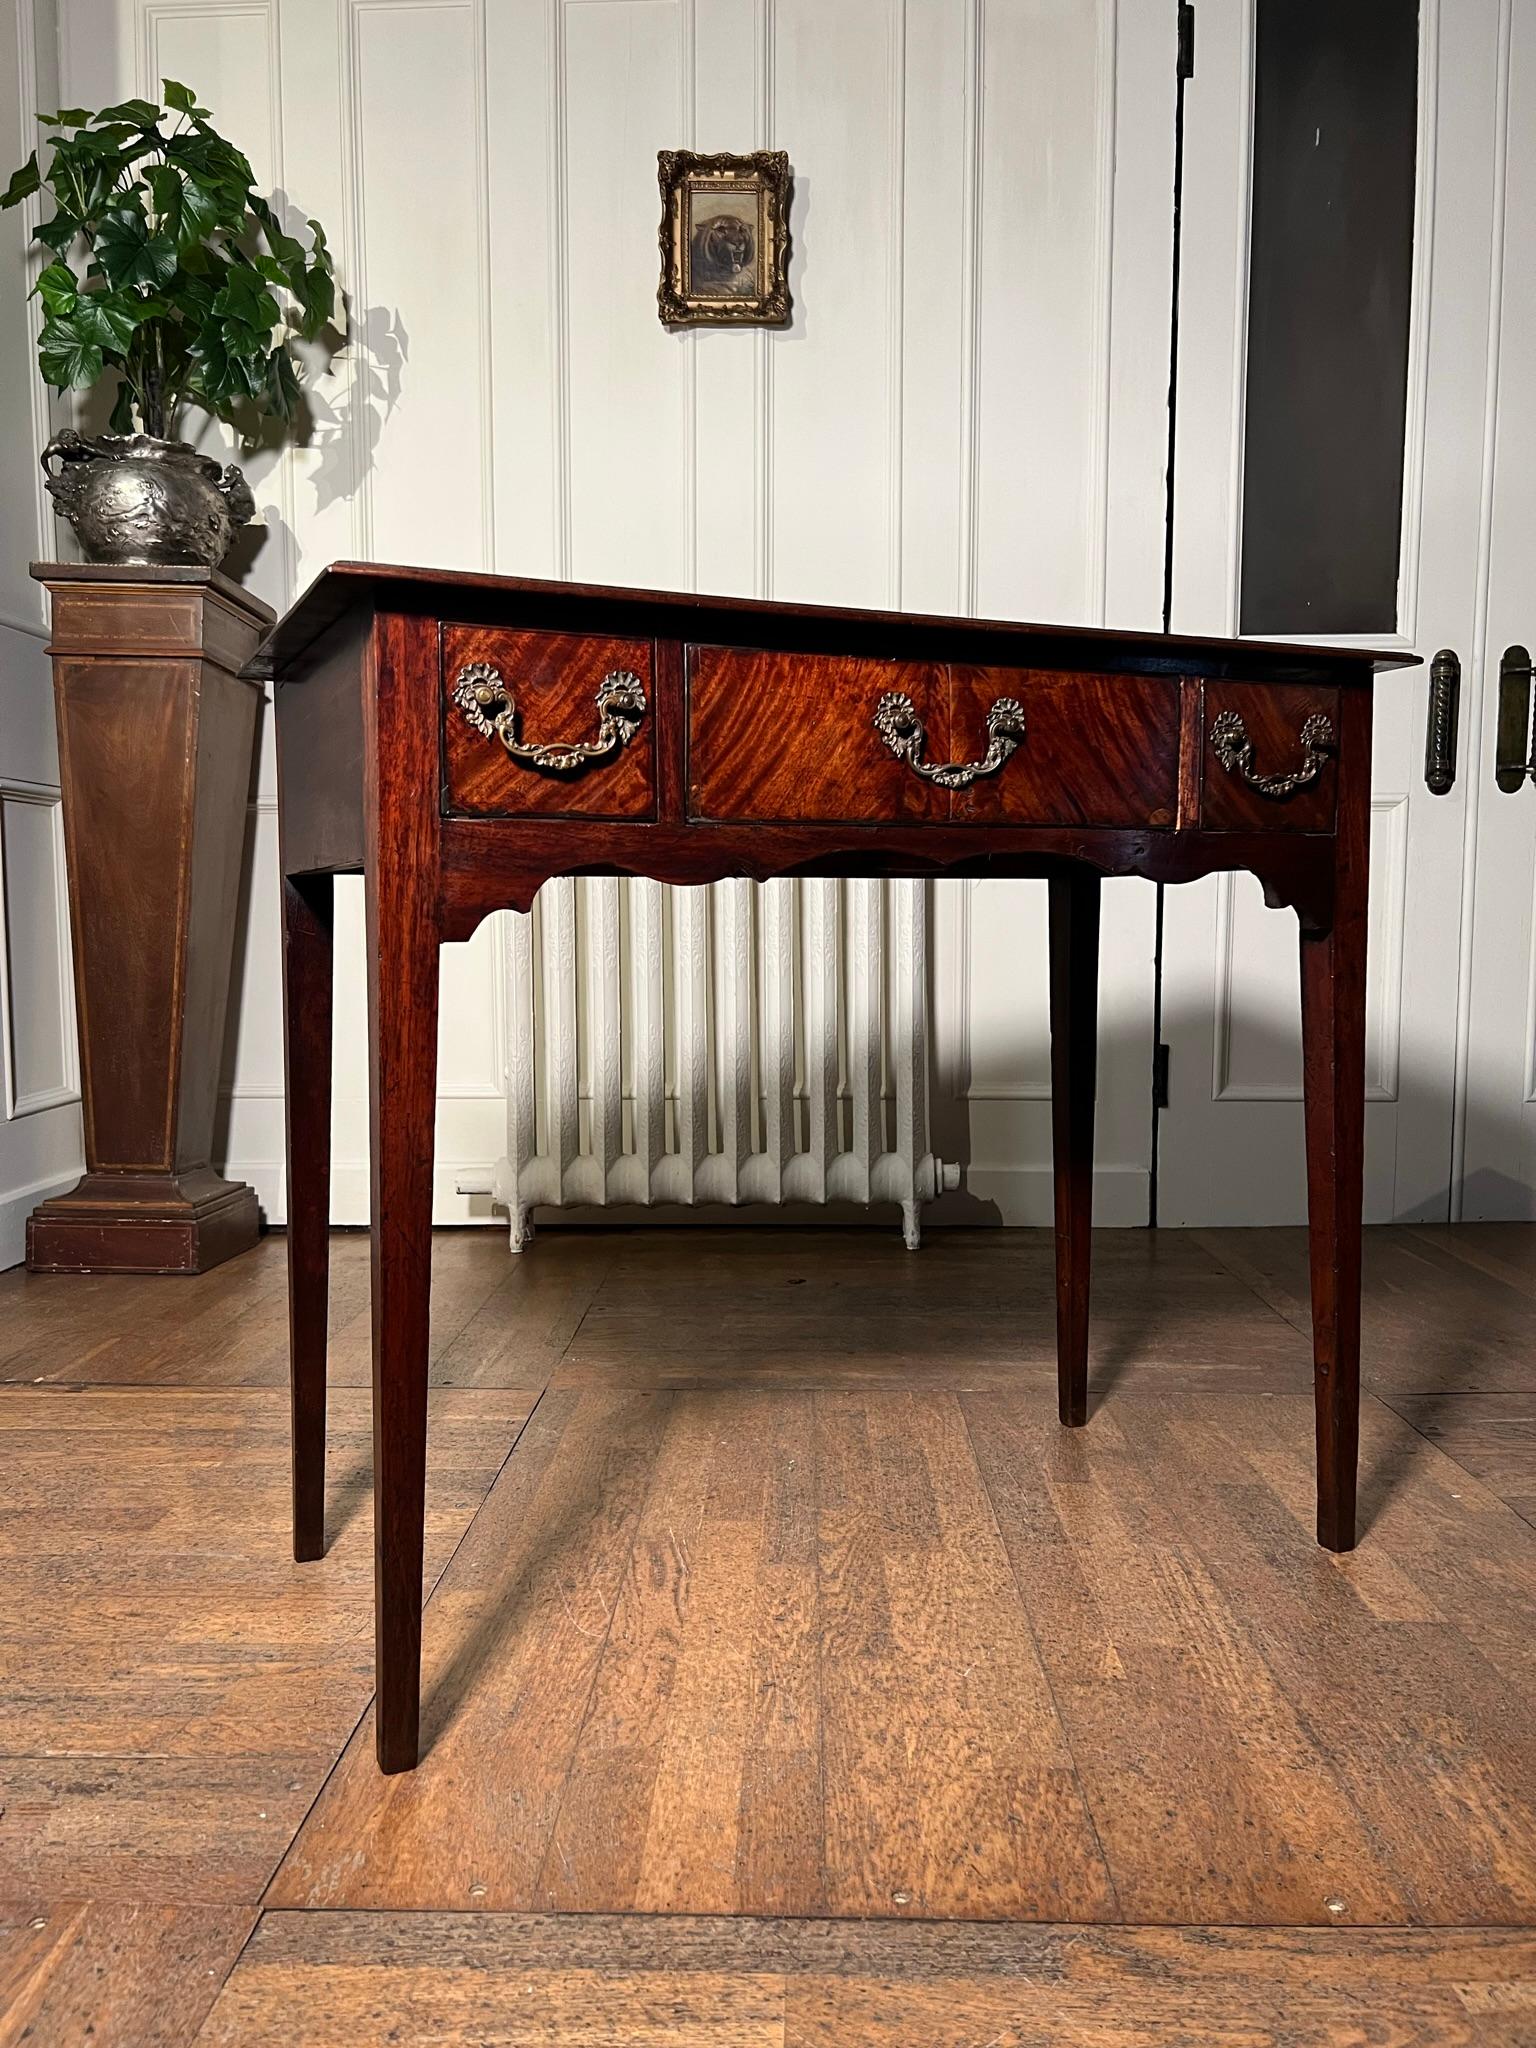 18th century walnut veneered side table on slender tapering legs.

Scroll front apron below 3 finely crossbanded drawers with Chippendale style pulls.

Measurements: 80cm h x 92cm w x 45cm d

(measurements are approximate and are taken at the